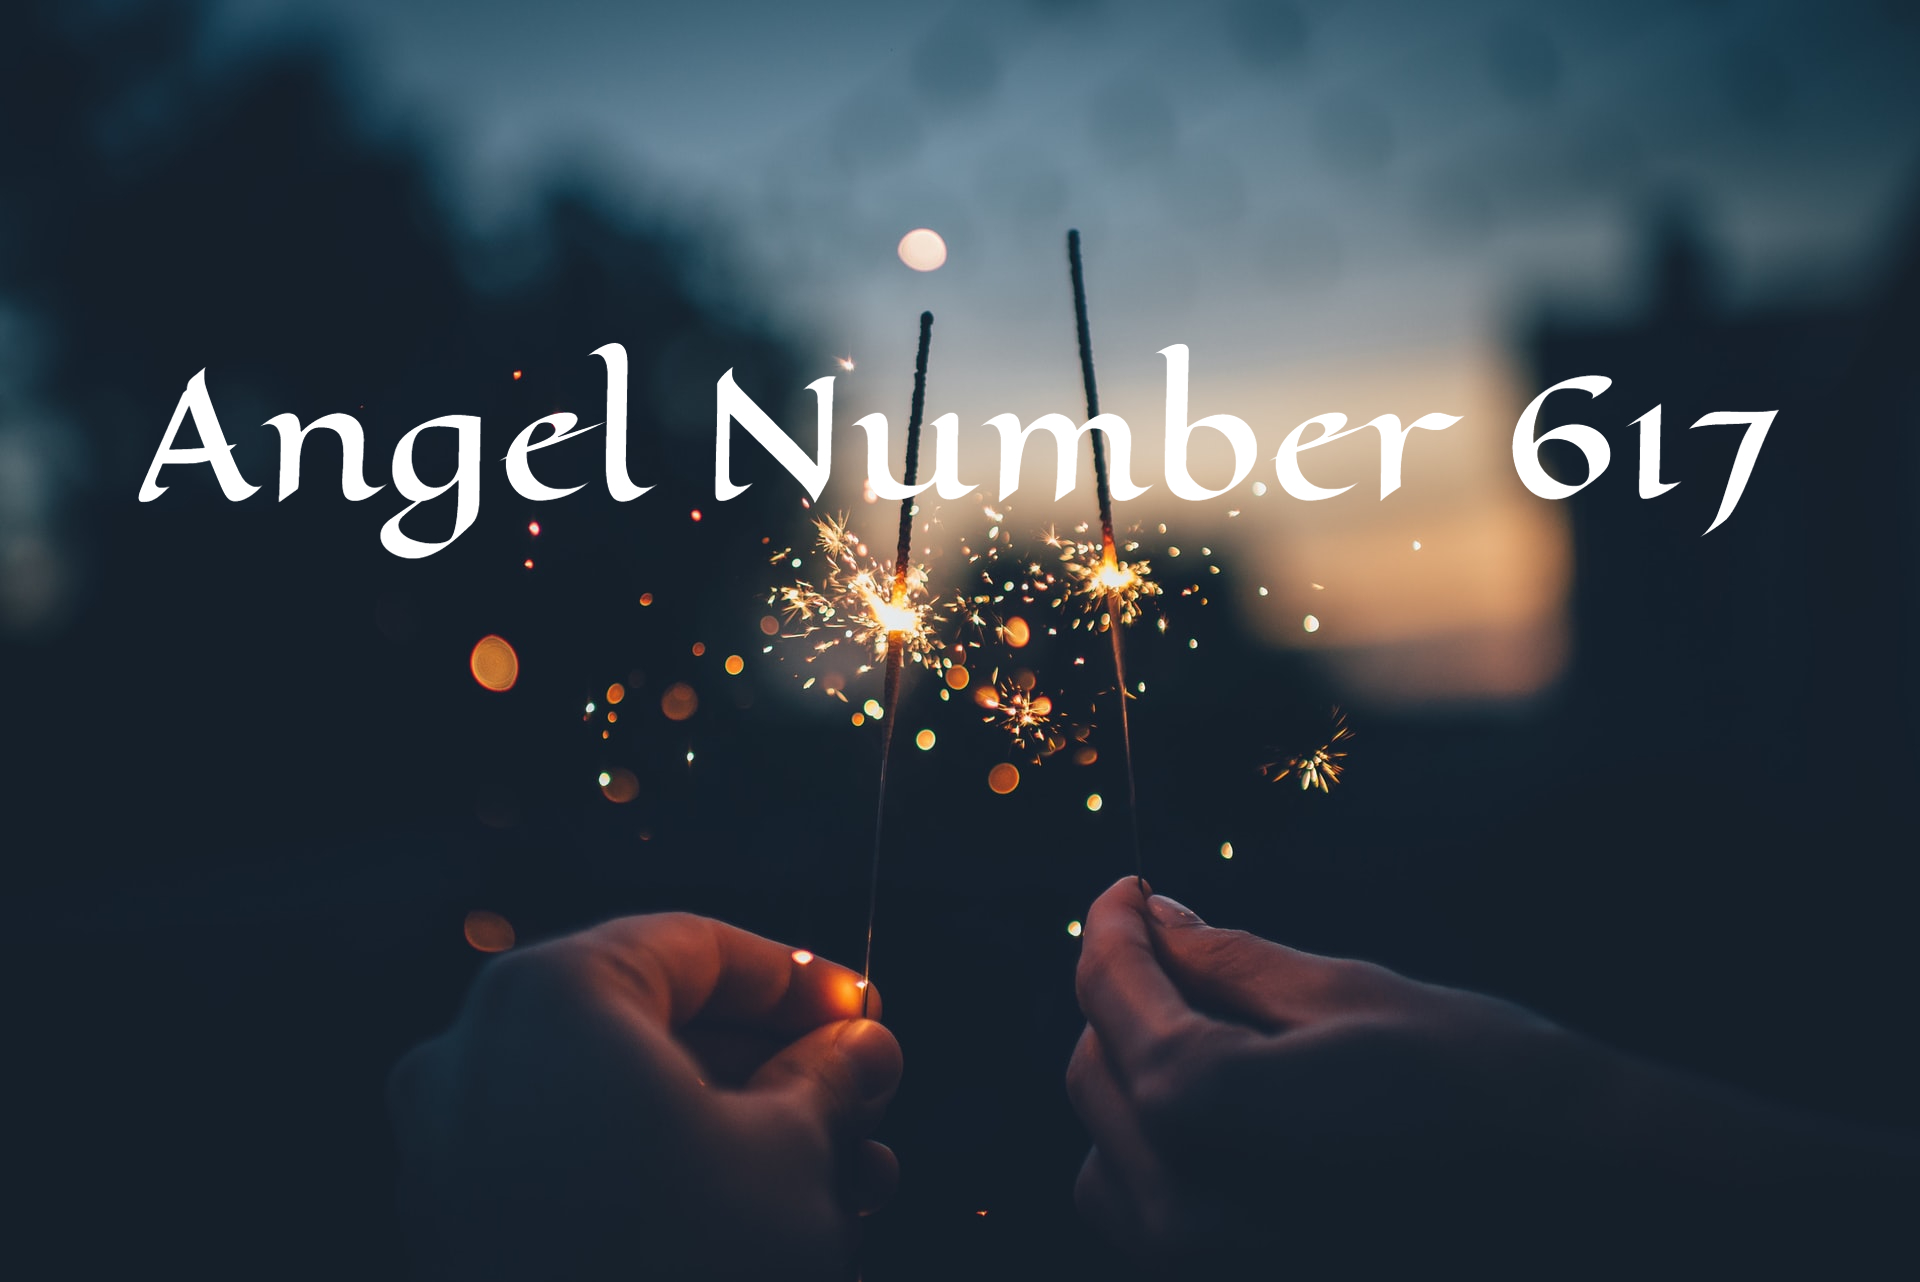 Angel Number 617 Meaning And Symbolism - The Beginning Of A New Cycle